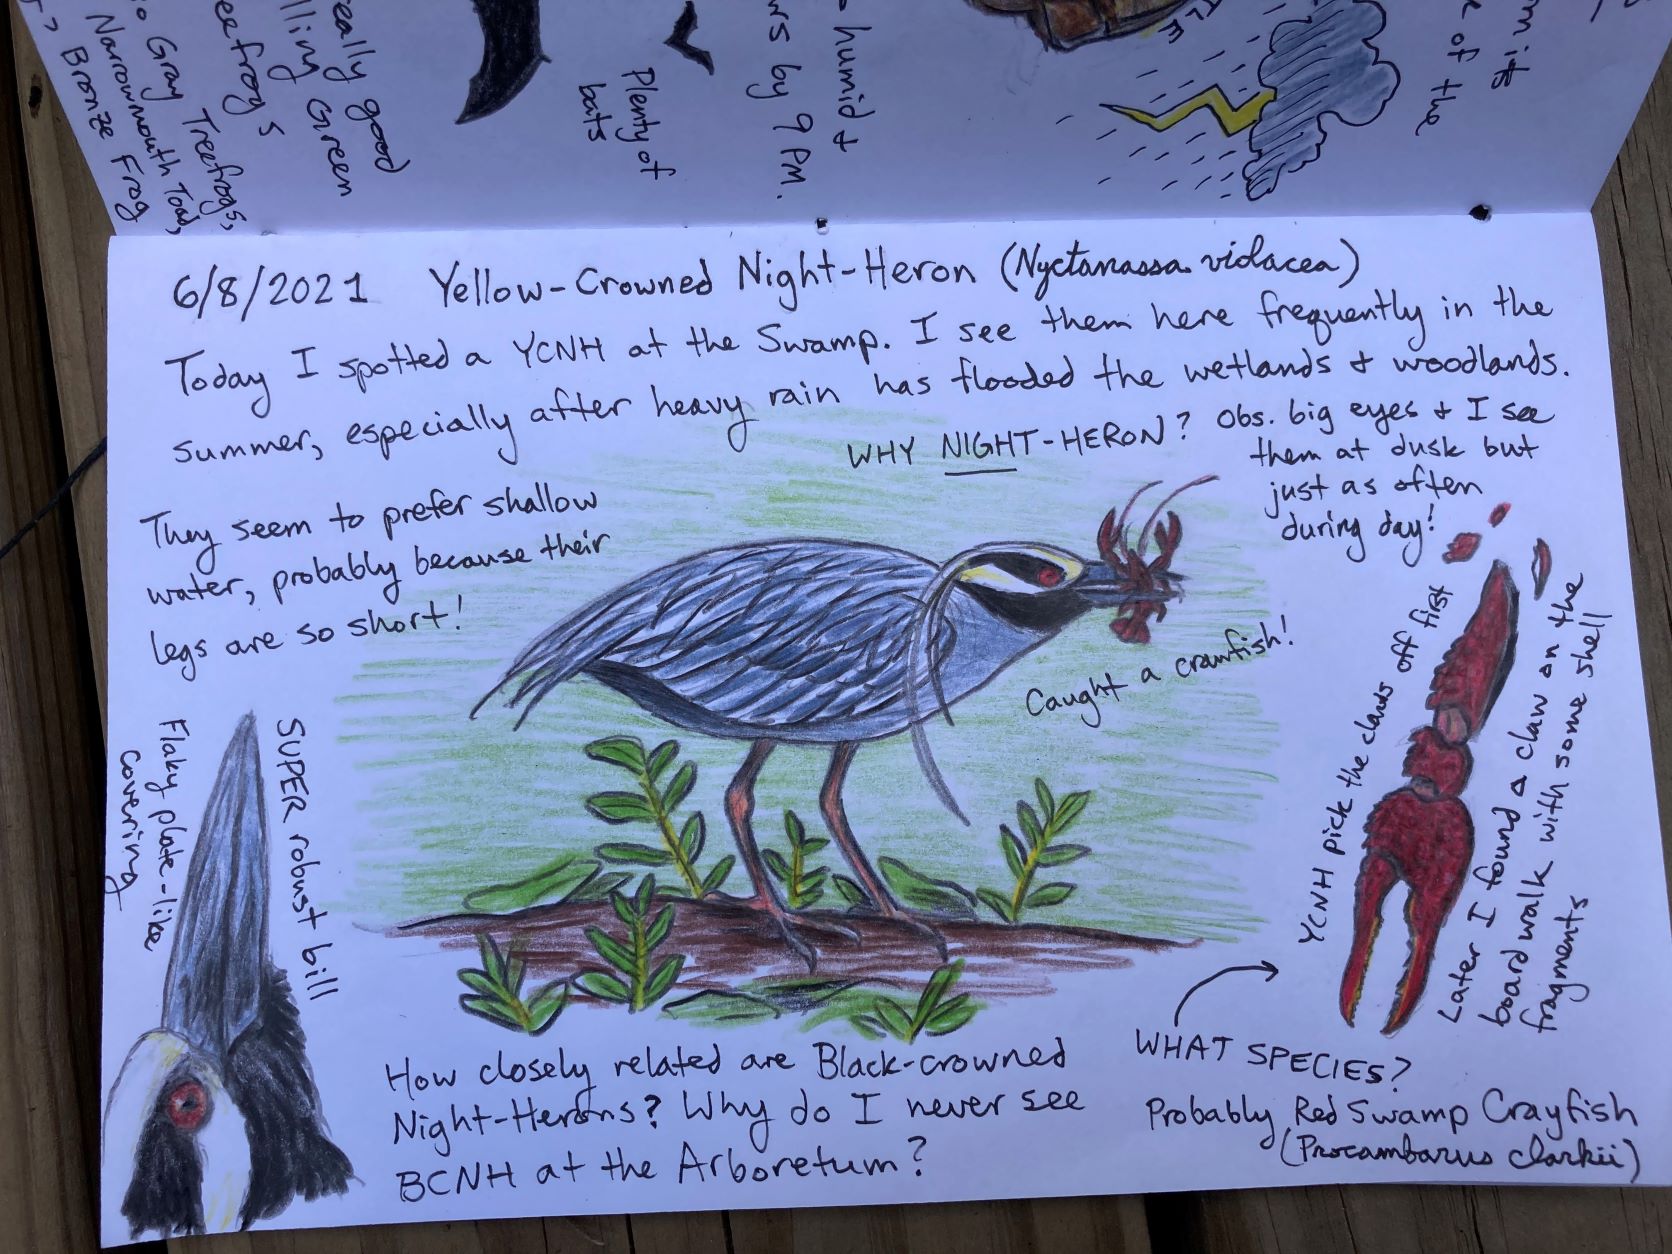 Nature Journal with drawings and notes about Yellow-crowned Night-Herons